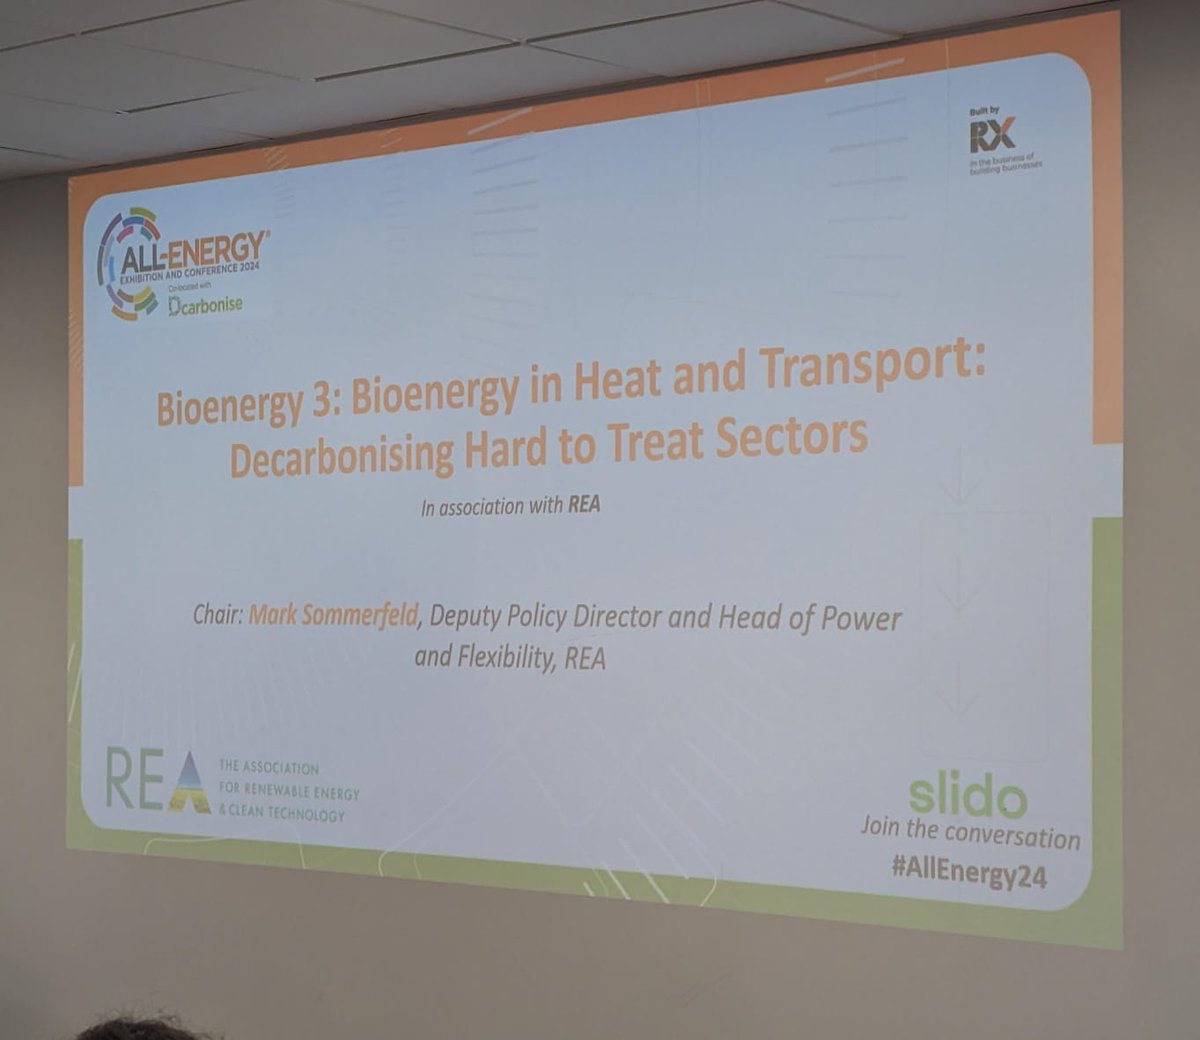 In the final stretch of his hat-trick today, @MSommerfeld242 REA's Deputy Director of Policy is chairing a third panel session at #AllEnergy24 '#Bioenergy in Heat and Transport: Decarbonising Hard to Treat Sectors'